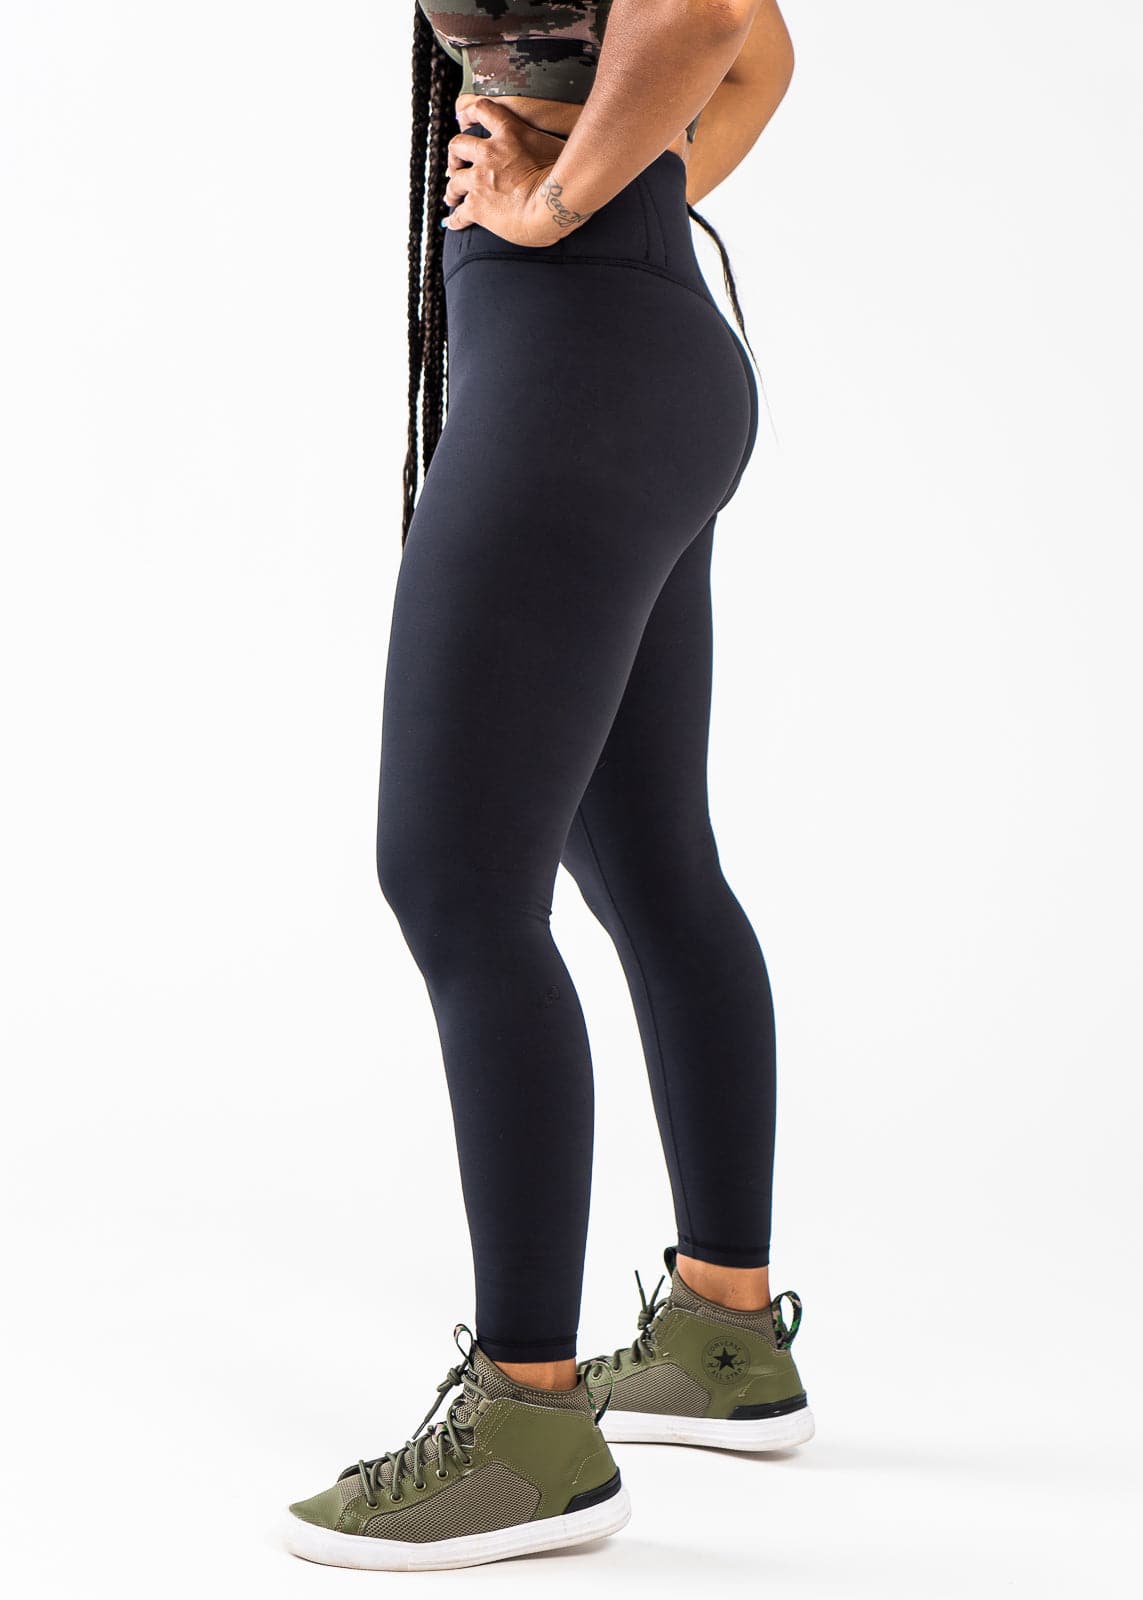 Chest Down Side View -Concealed Carry Leggings With Tactical Pockets | Black